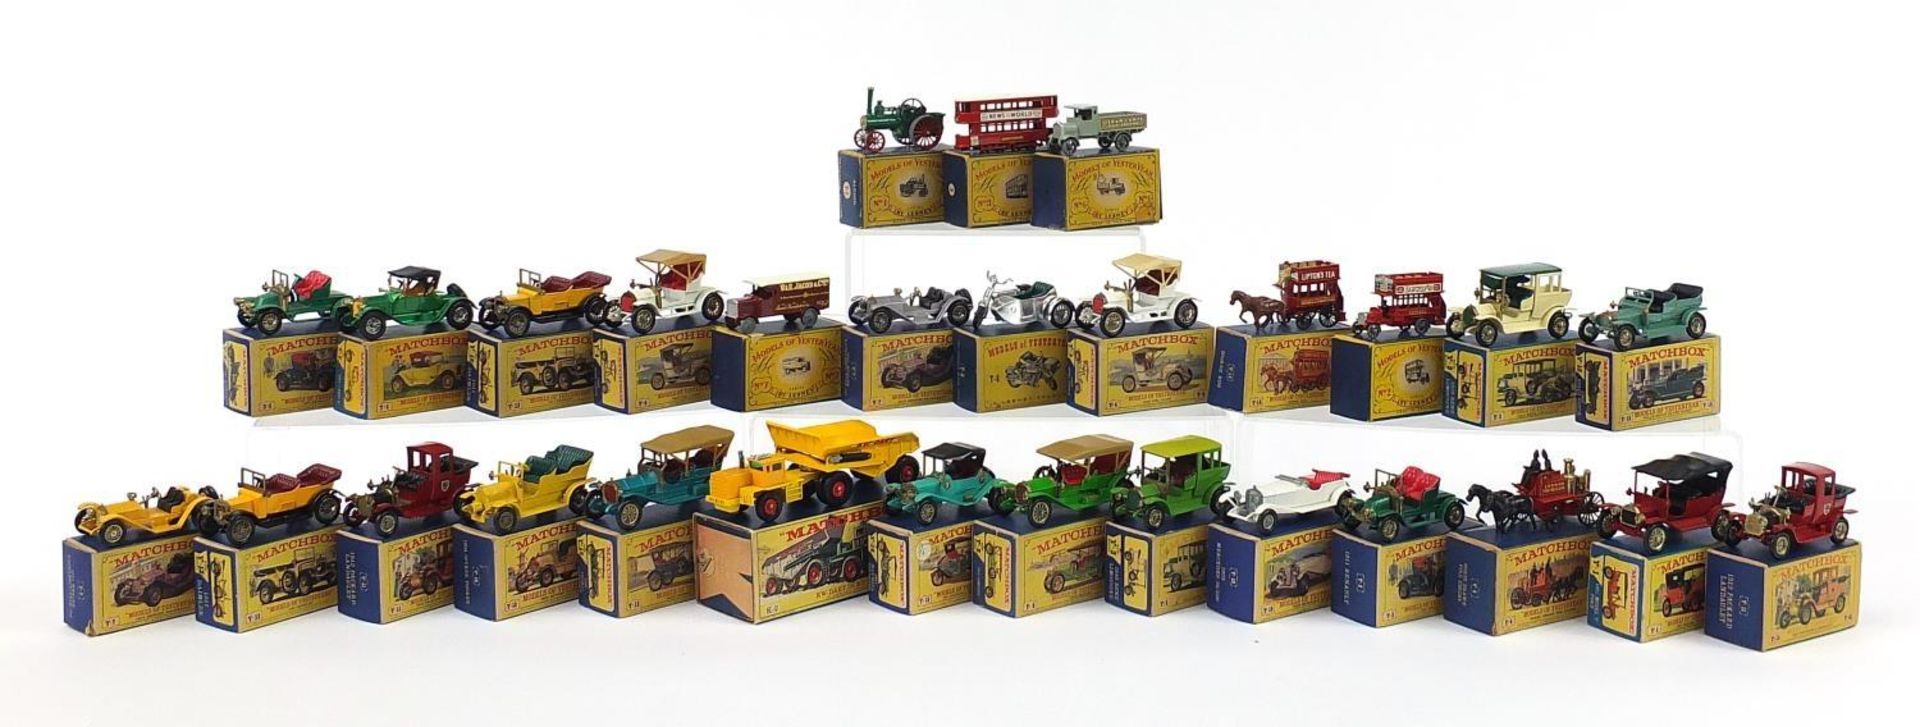 Twenty nine matchbox Models of Yesteryear die cast vehicles with boxes including KW-Dart dump